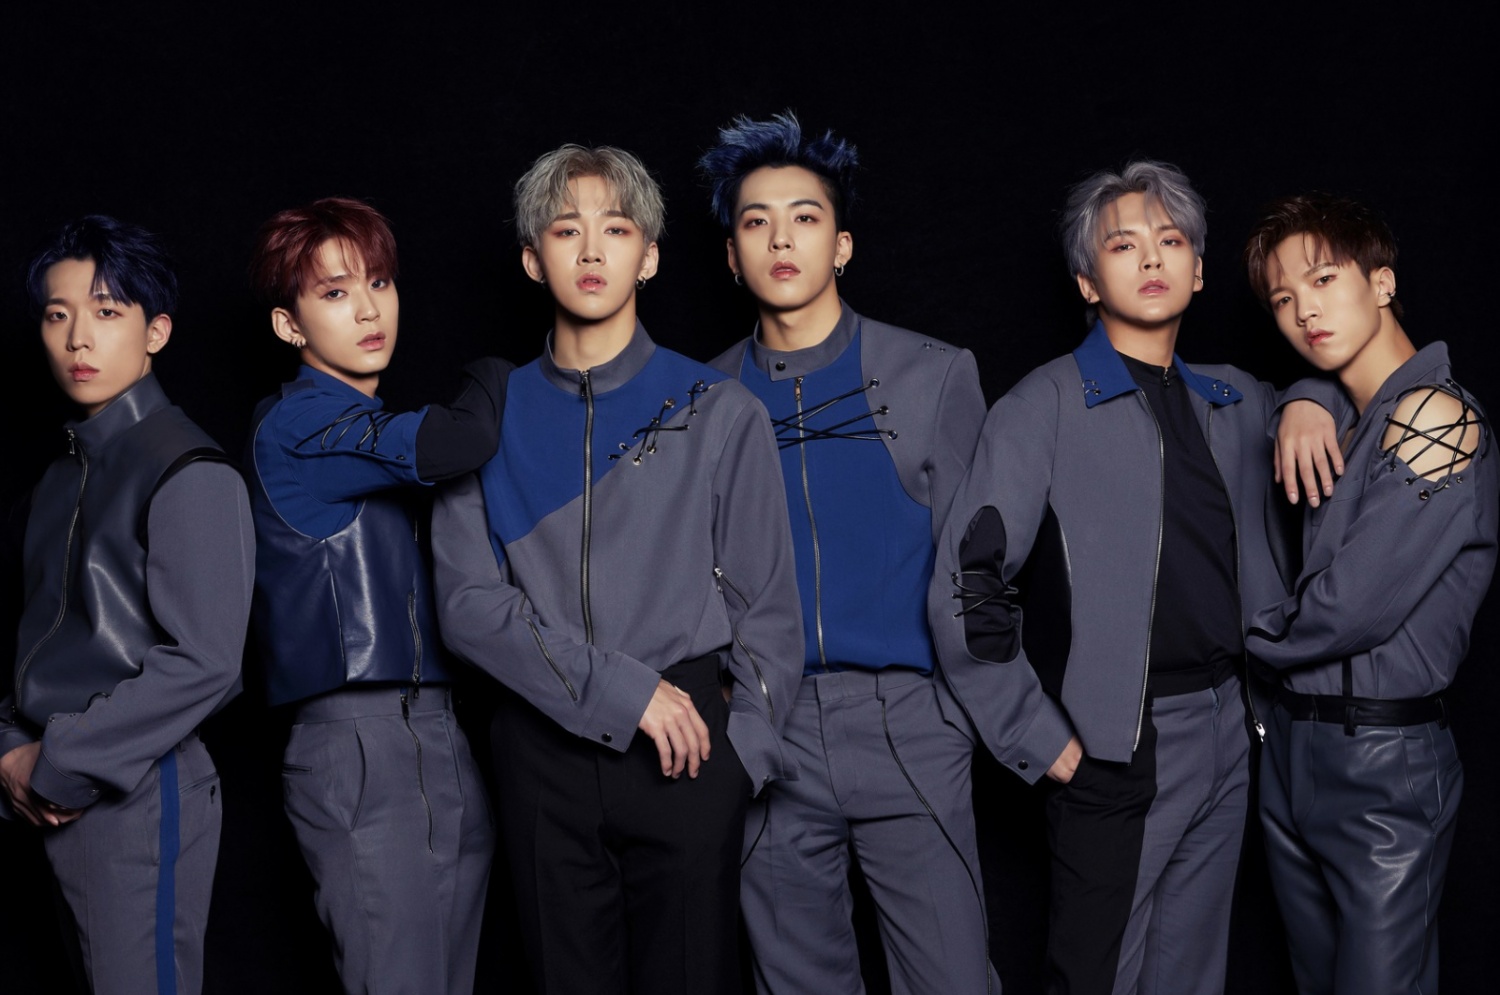 D-CRUNCH is falling apart – what will happen to the members?